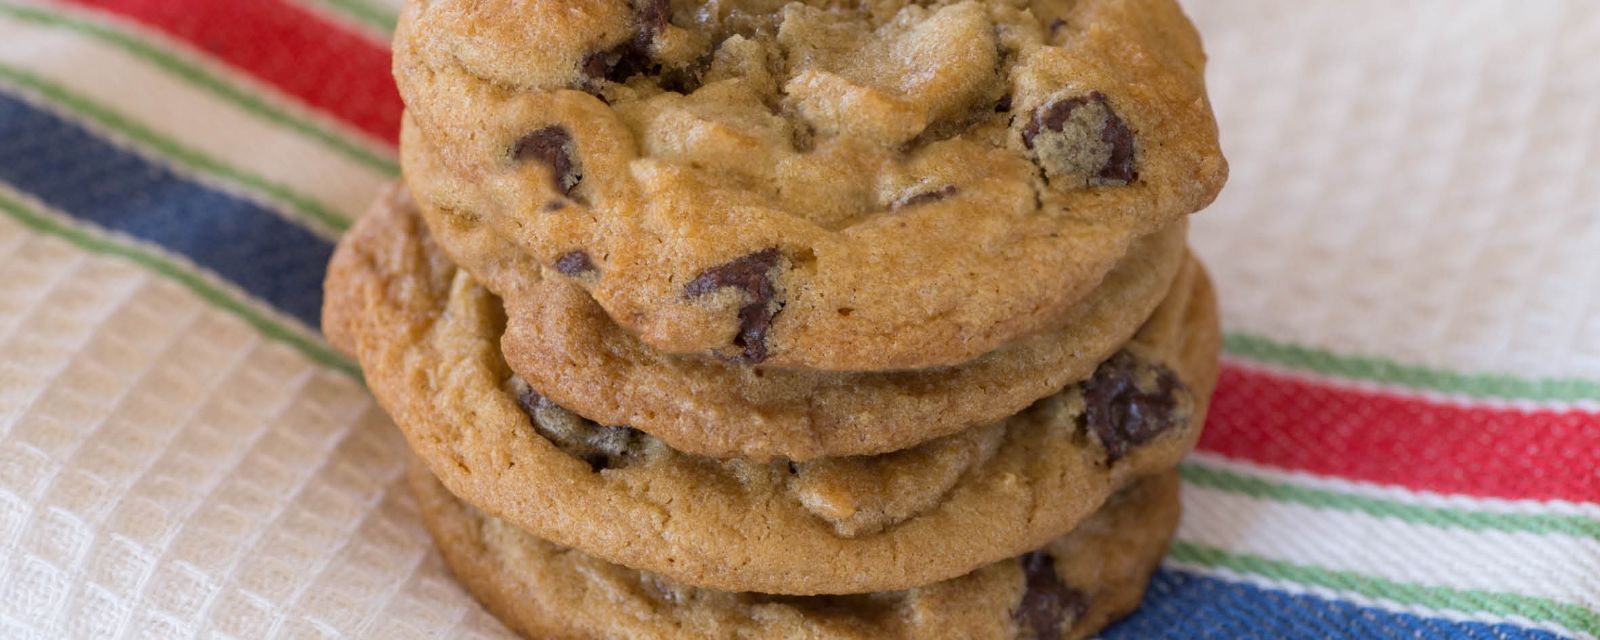 How to make chewy chocolate chip cookies … kitchen helper.jpg